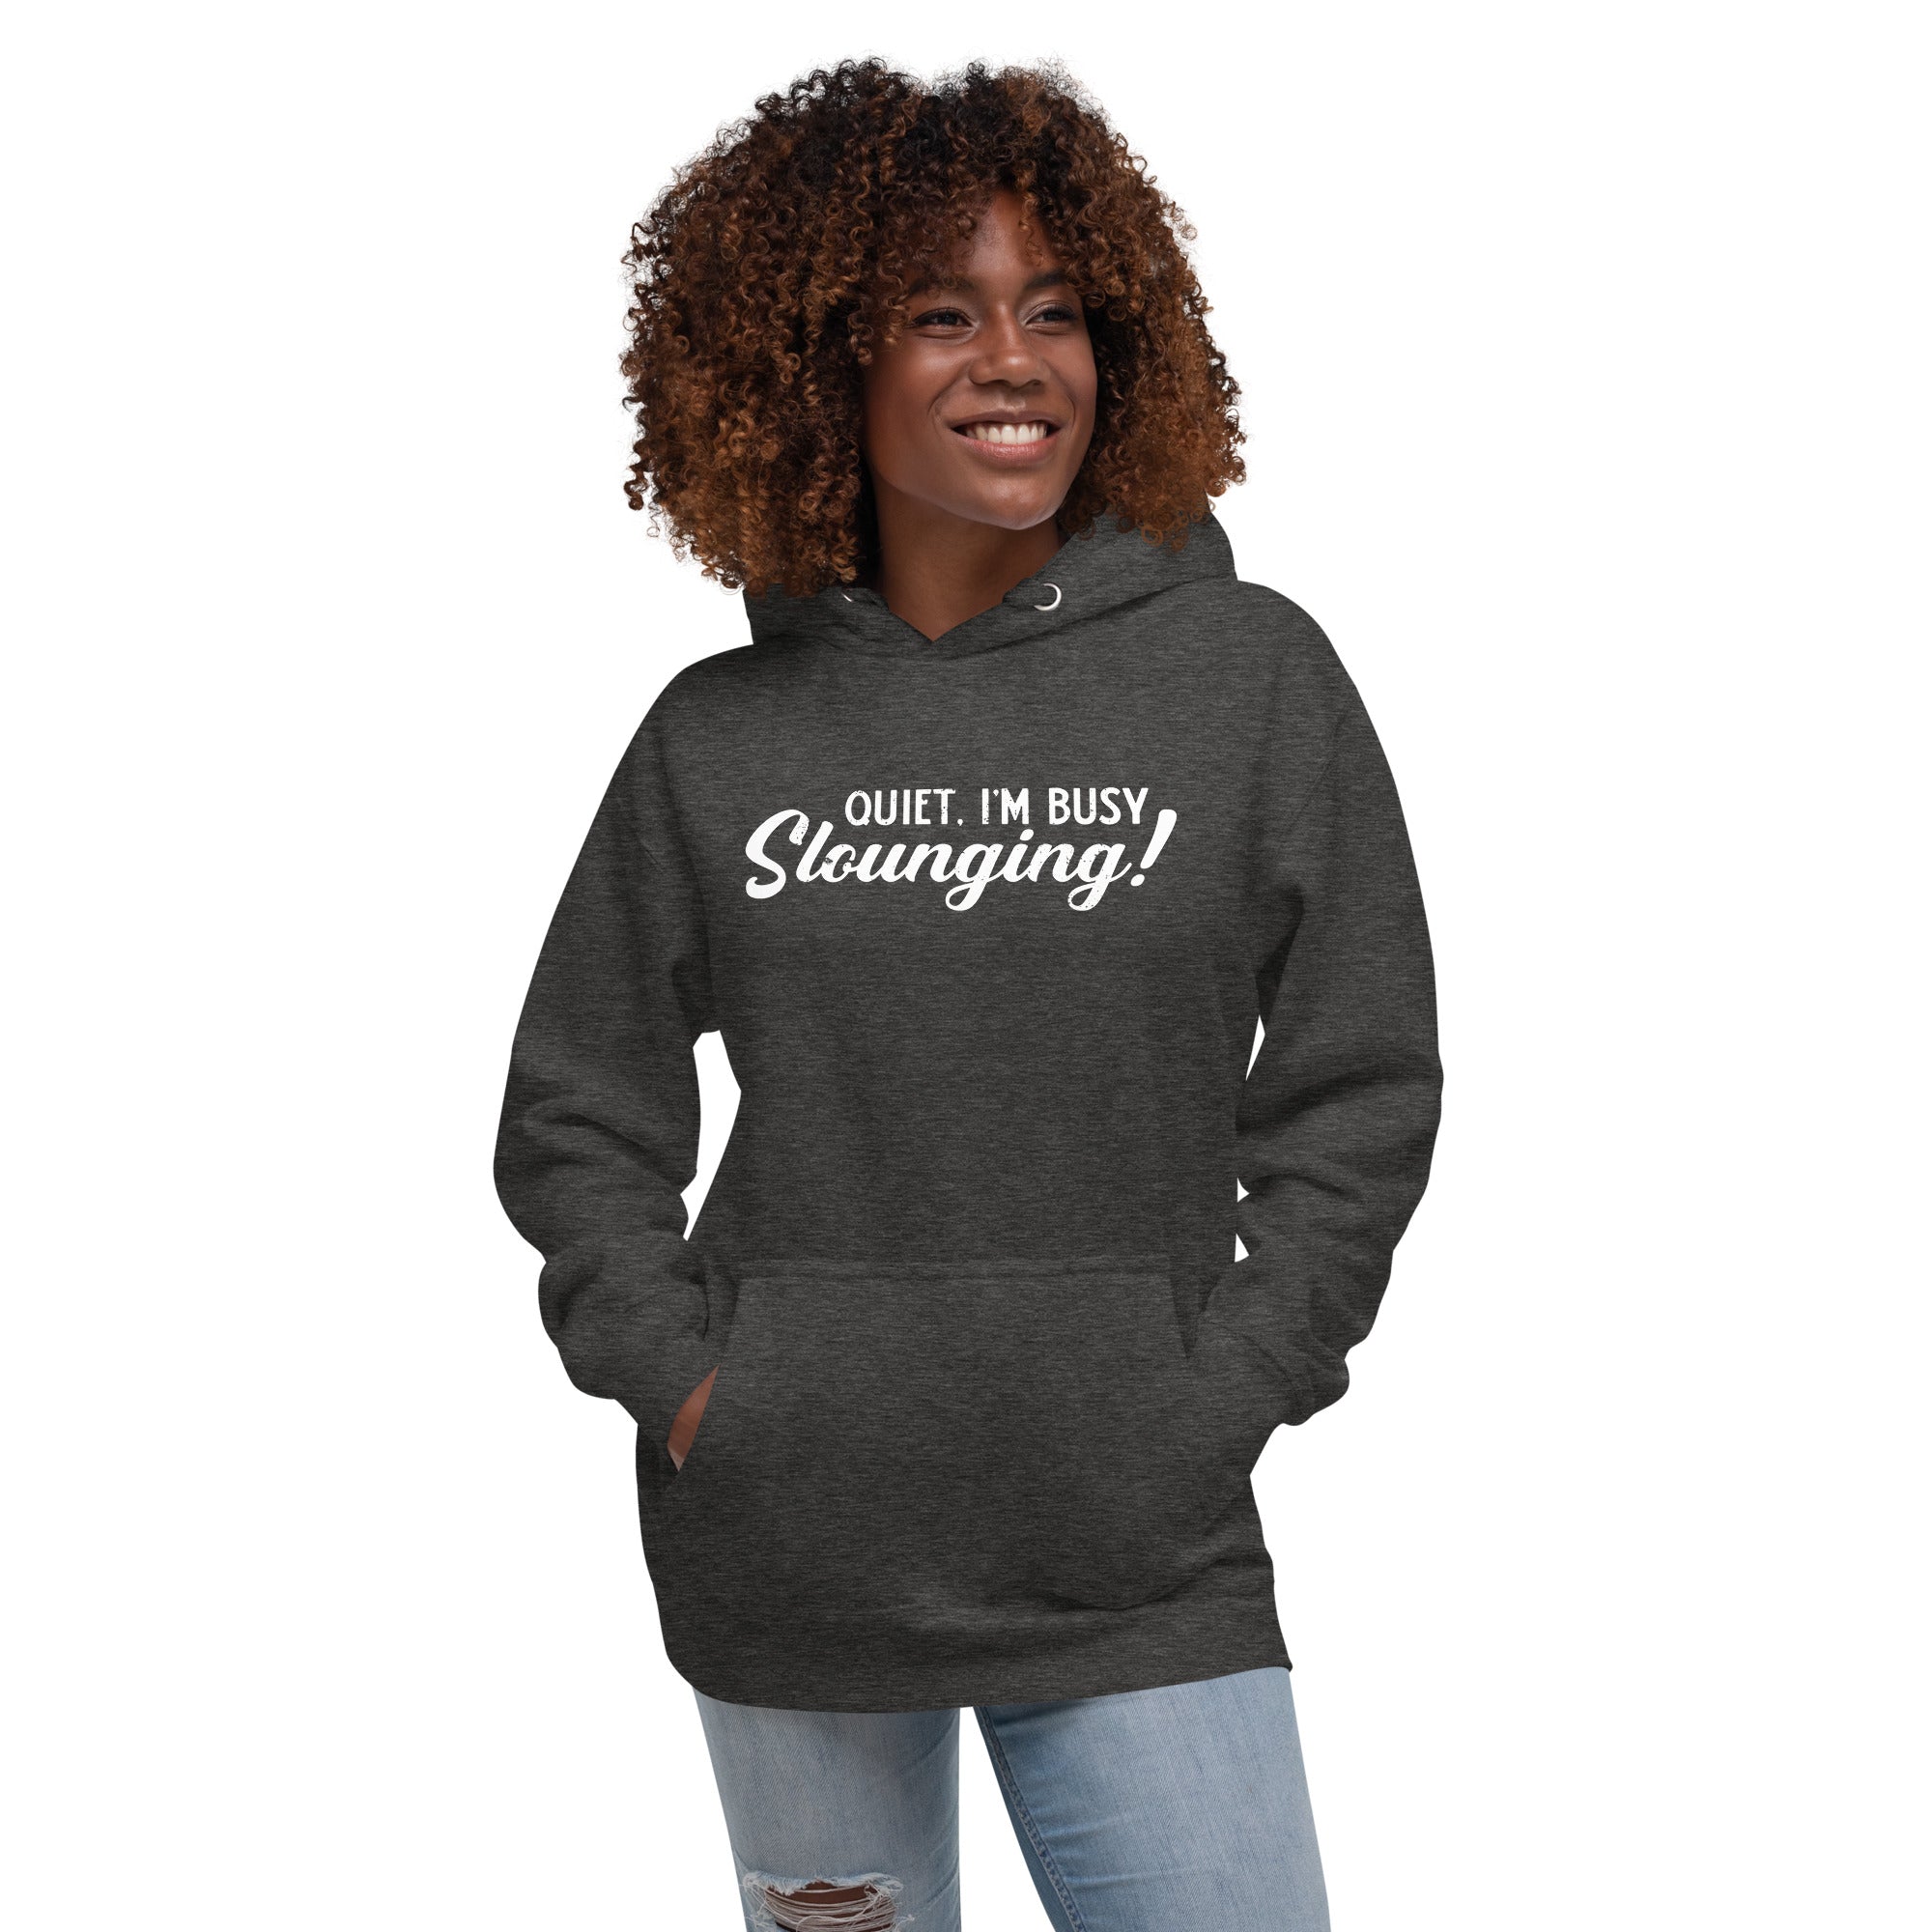 Quiet, I'm Busy Slounging Hoodie